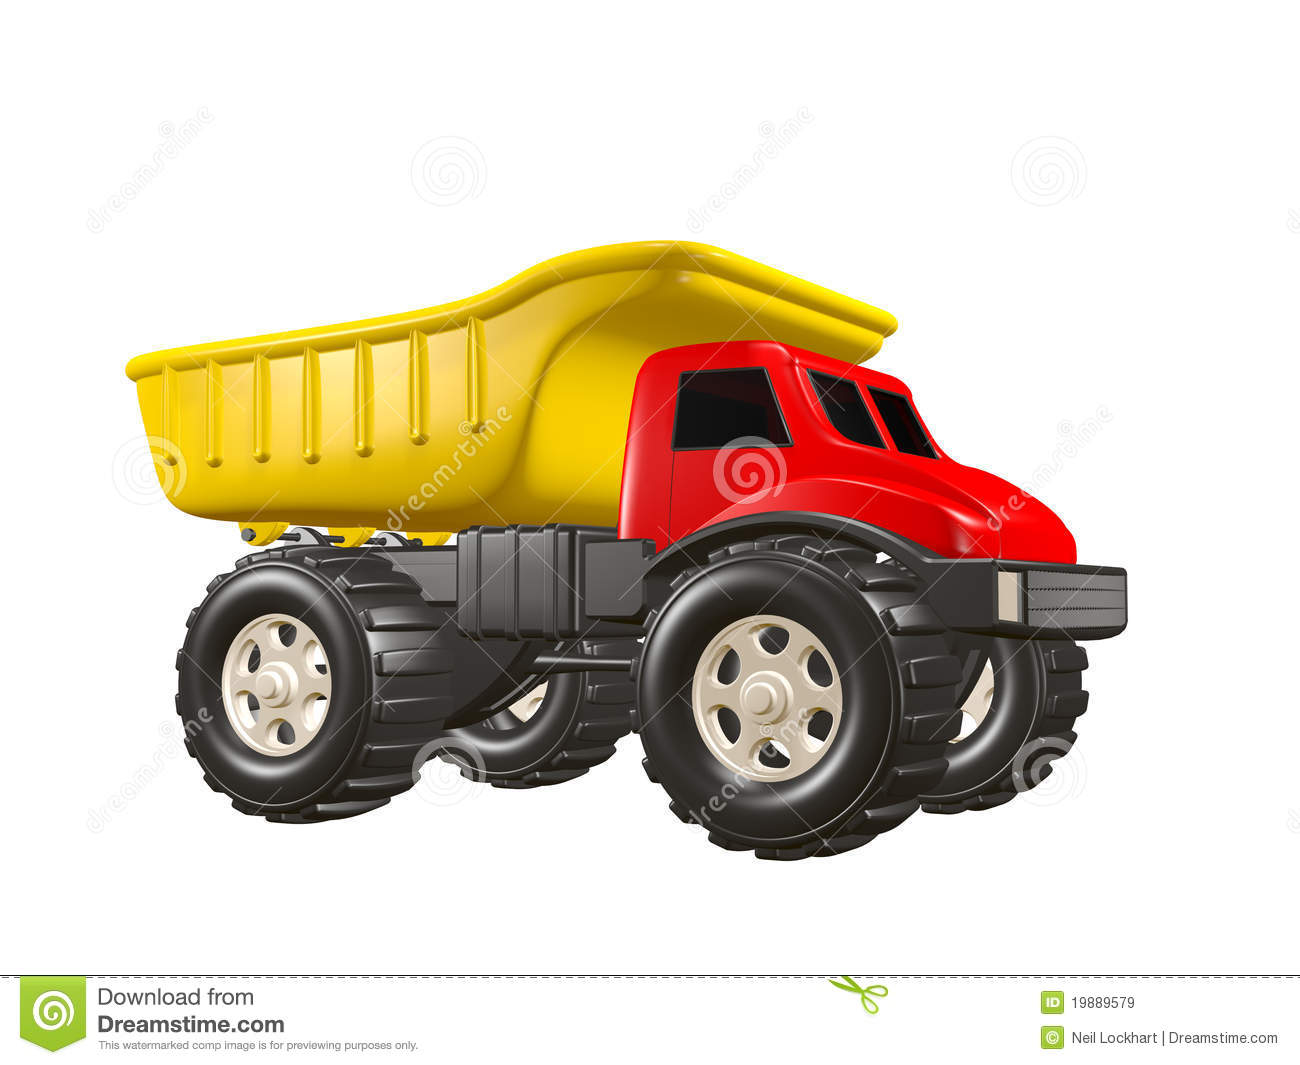 Toy Dump Truck Royalty Free Stock Images   Image  19889579